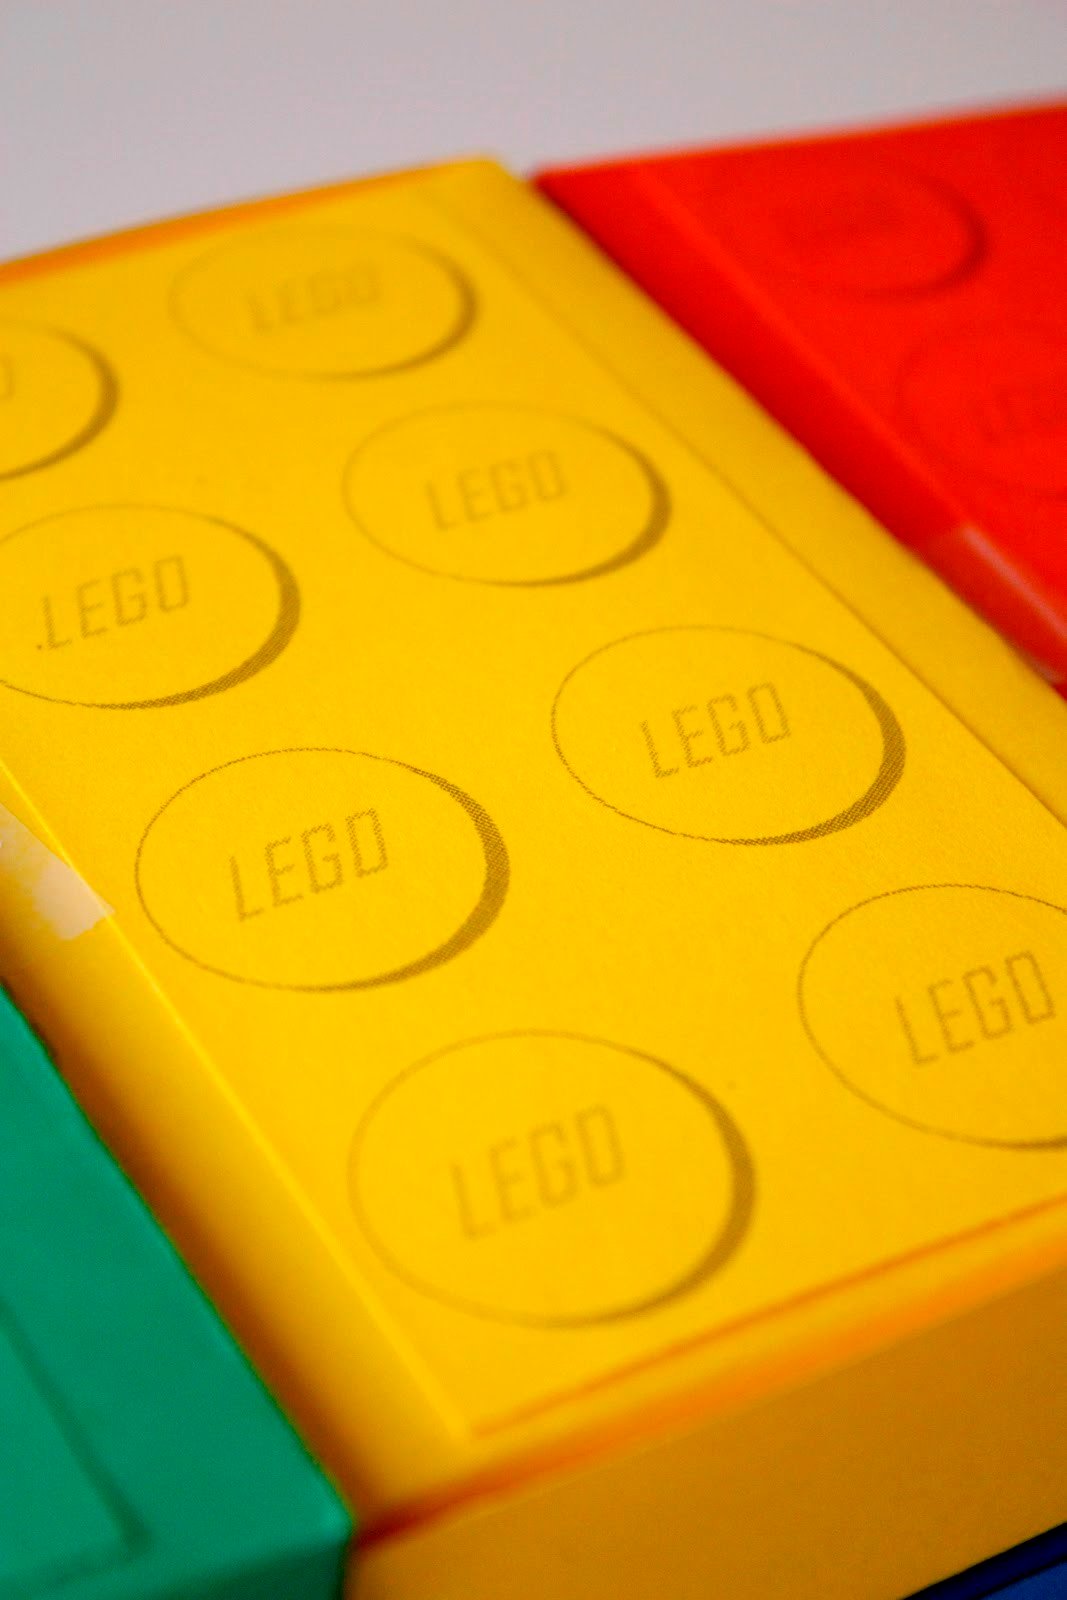 Lego Brick Favor Boxes And Free Printables